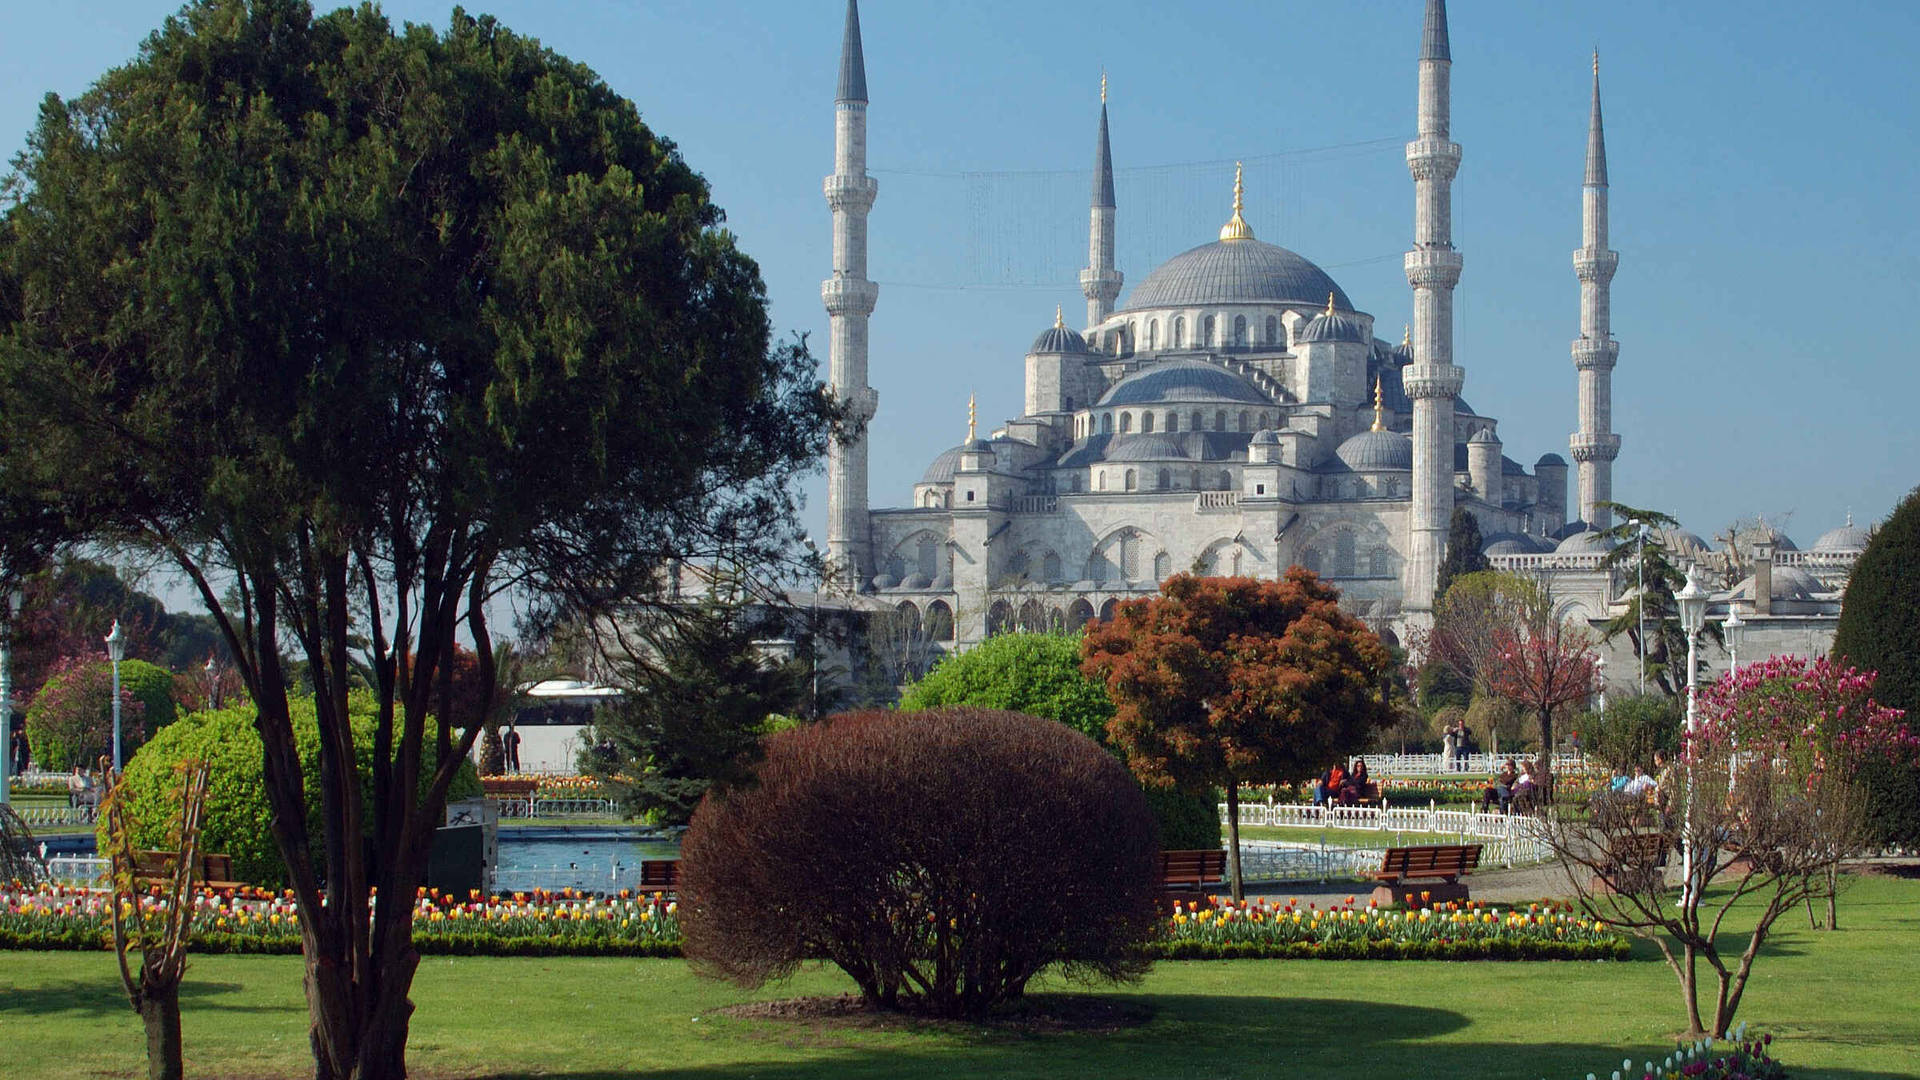 Istanbul's Sultan Ahmed Mosque